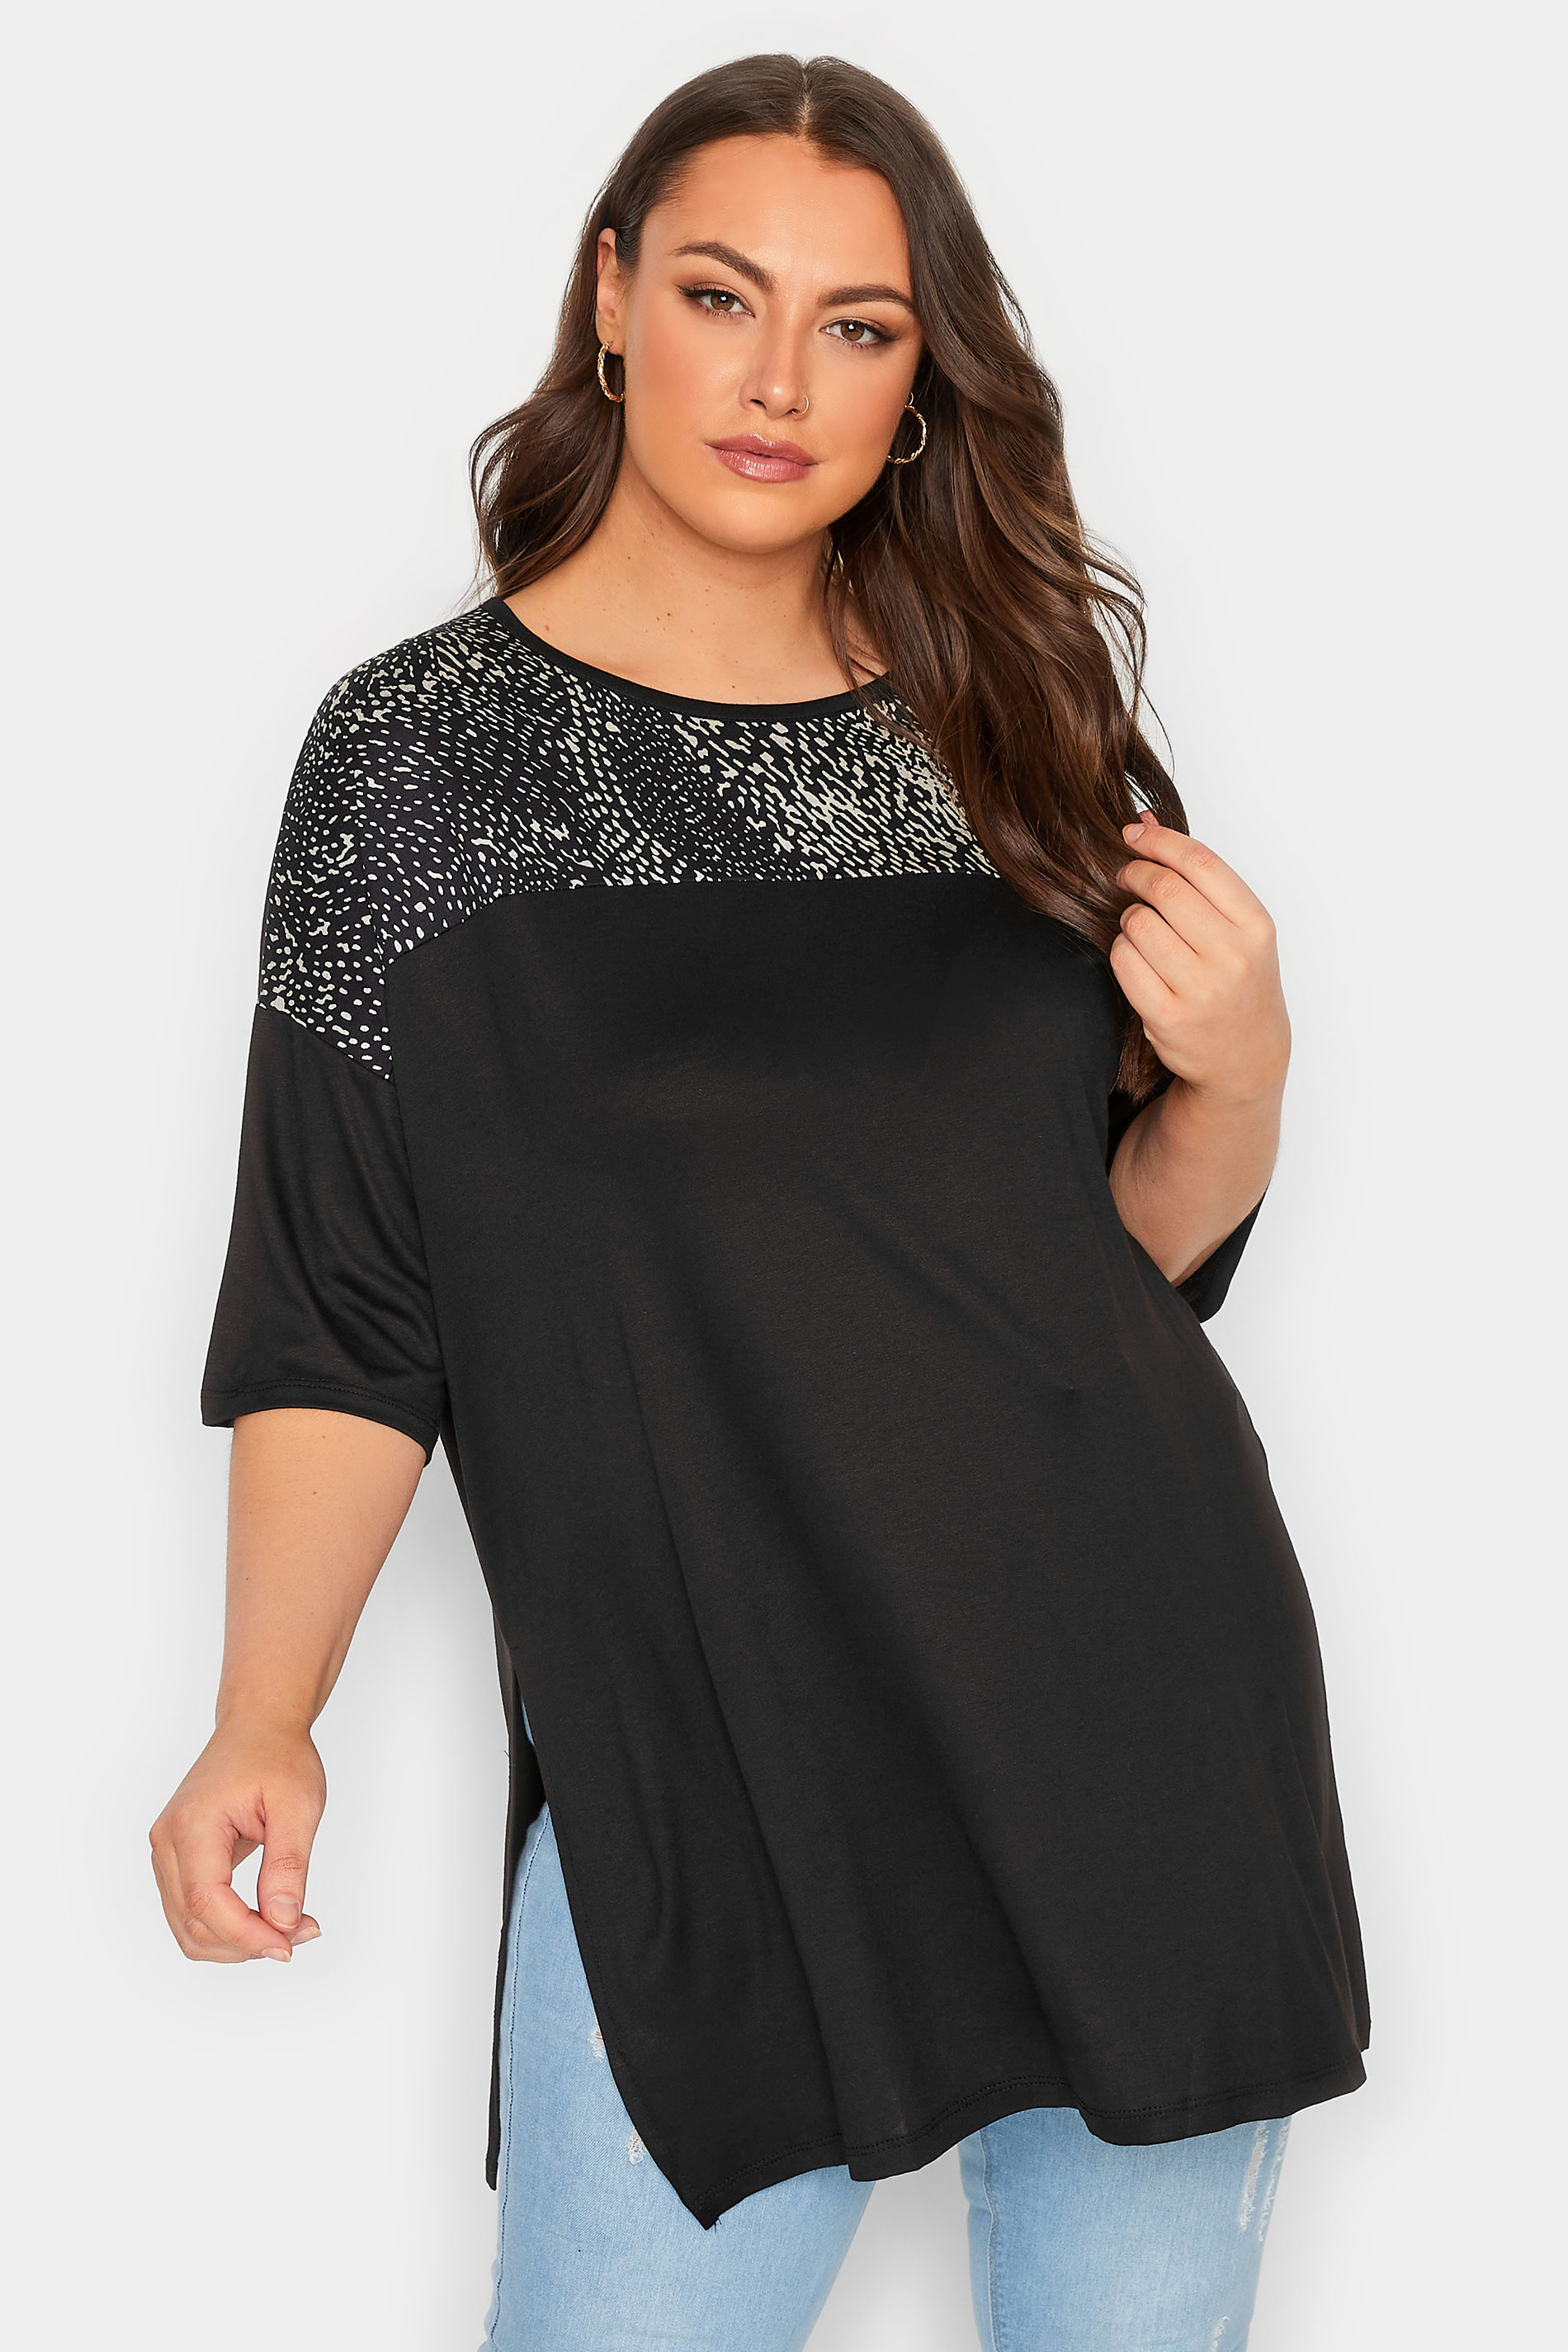 YOURS Plus Size Black Animal Print Contrast Detail Top | Yours Clothing 1